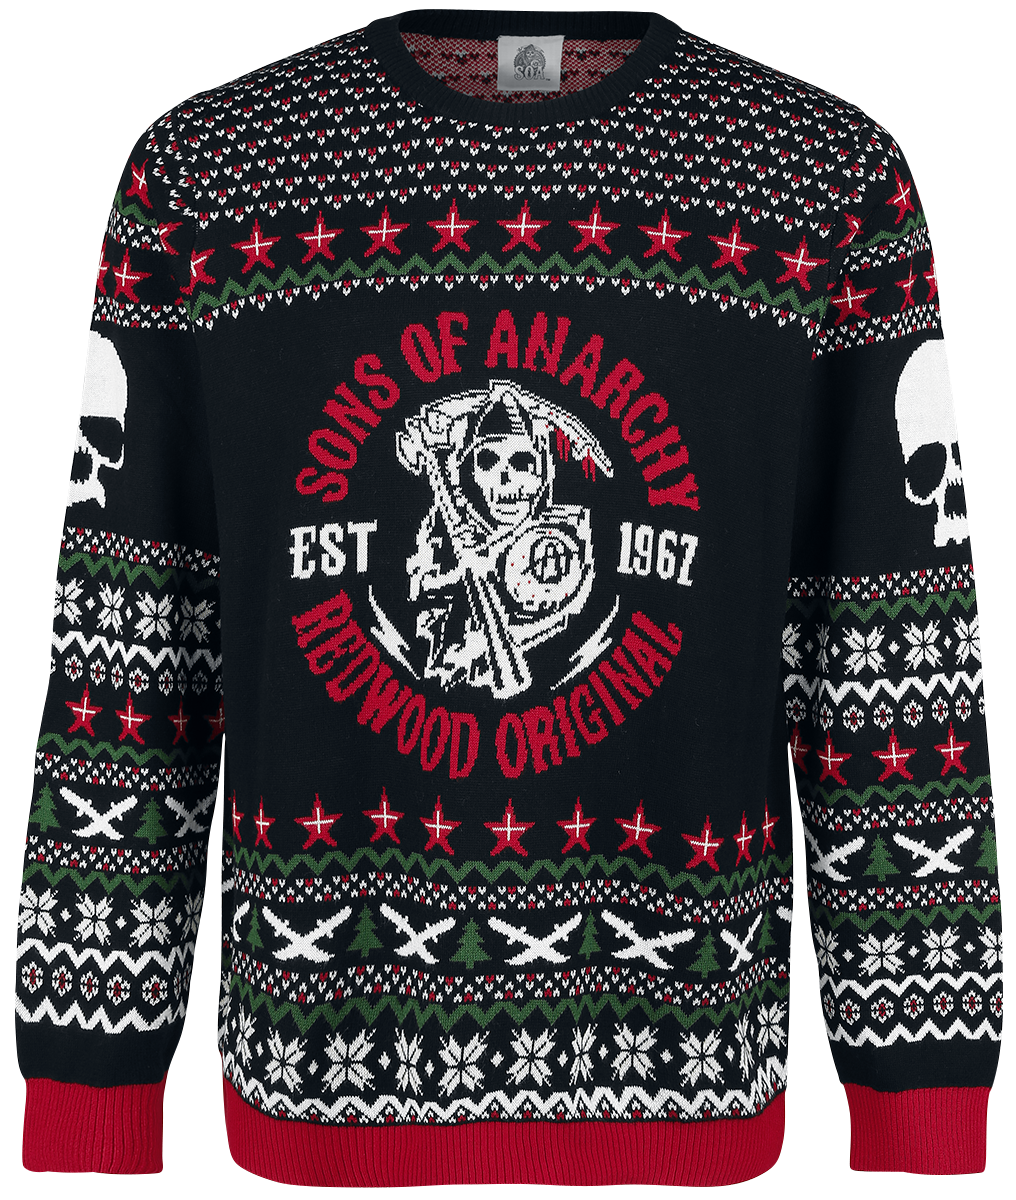 Sons Of Anarchy - Reaper - Knit sweater - multicolour image